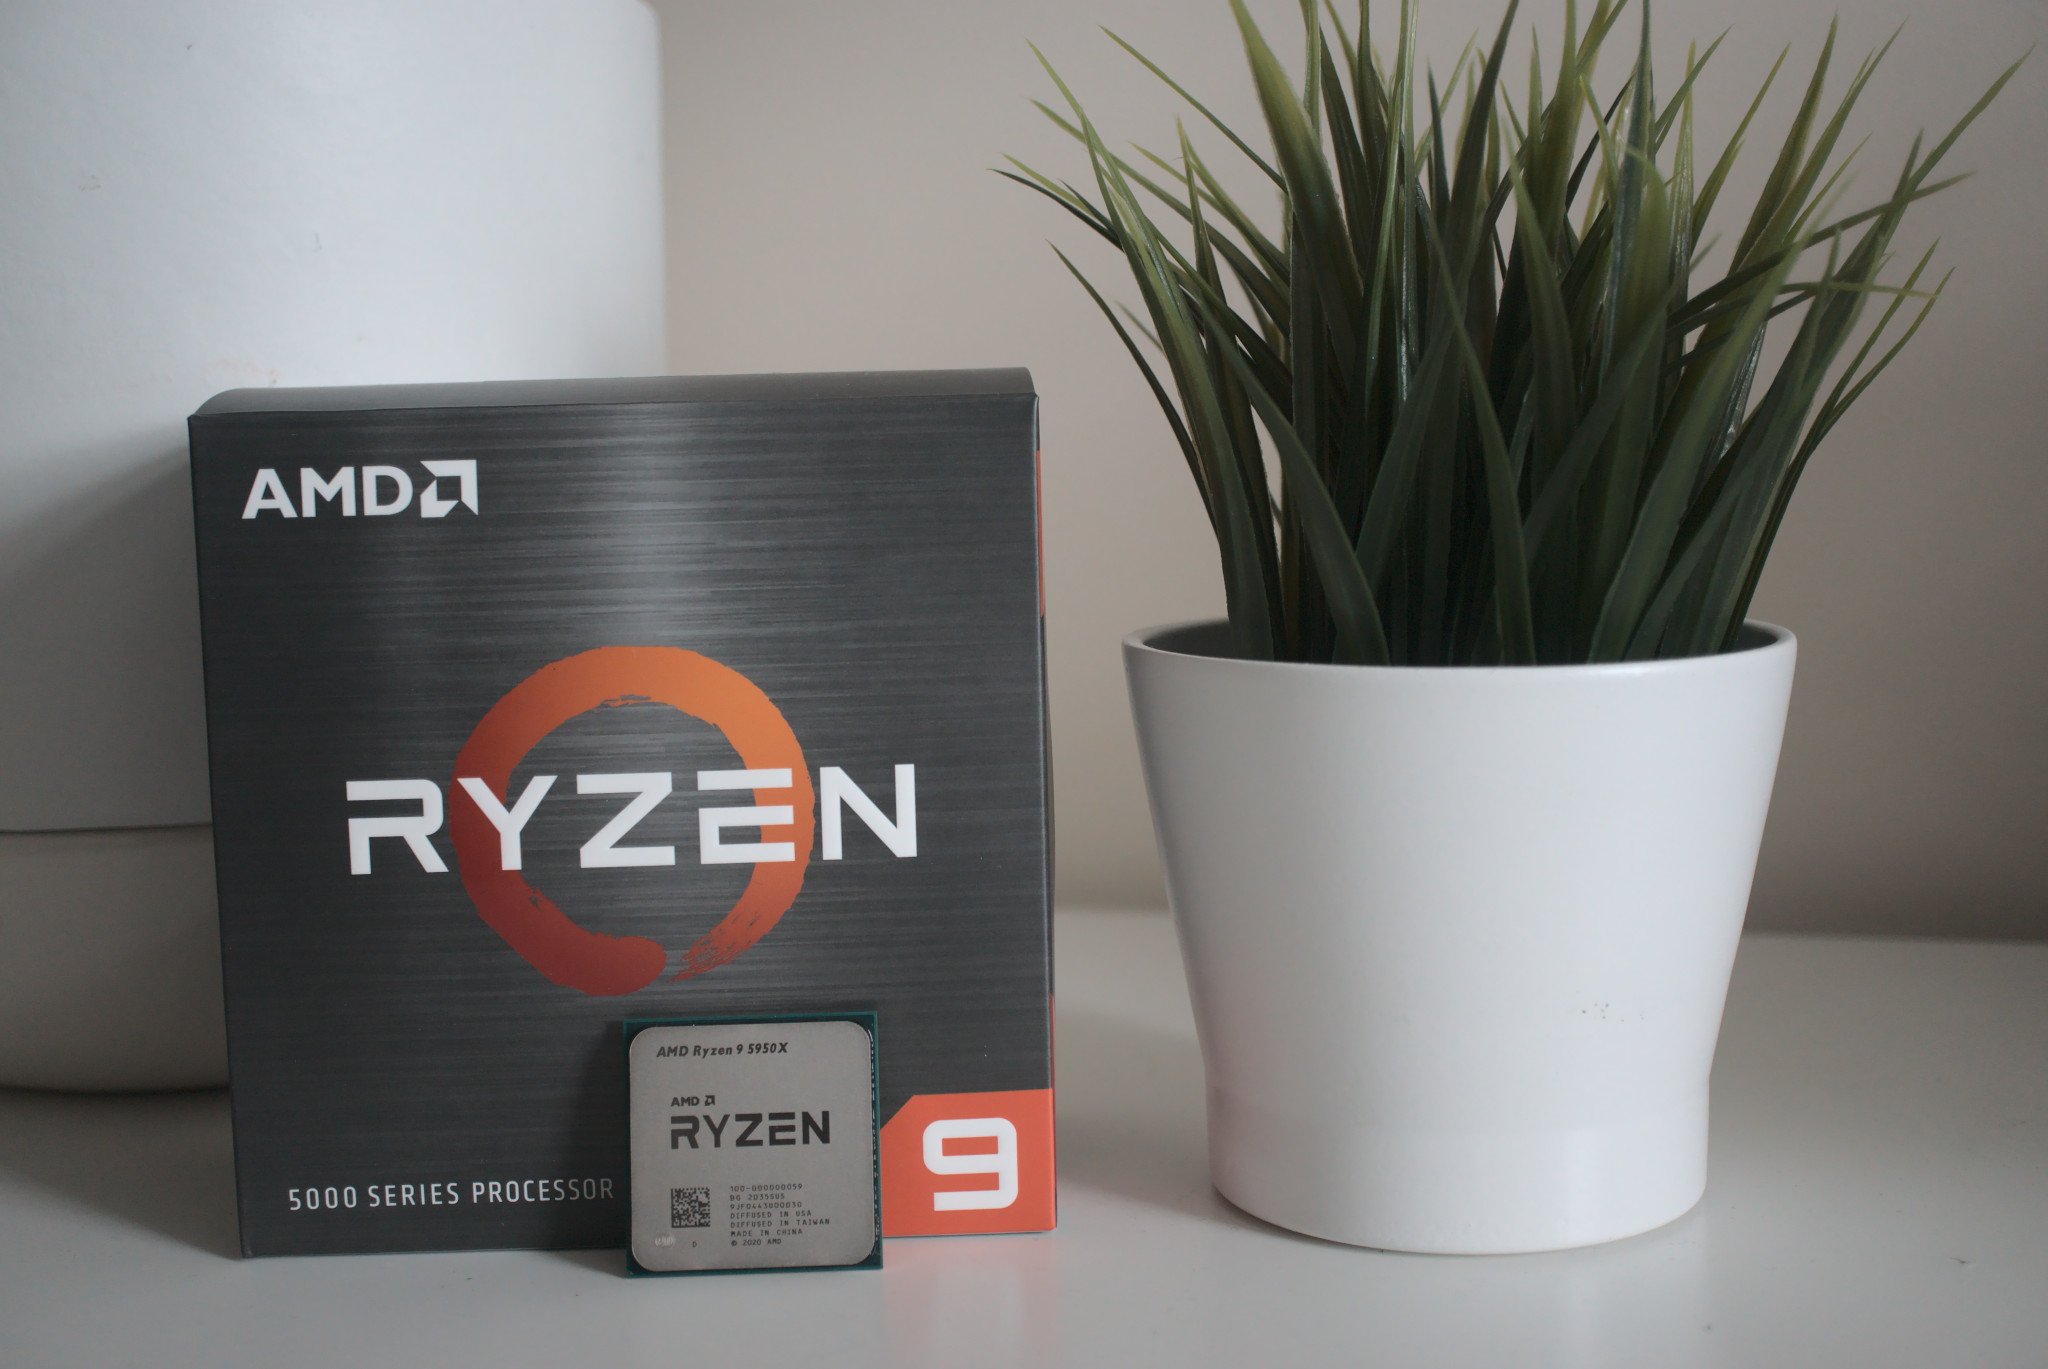 AMD Ryzen 9 5950X review: This monstrous CPU is overkill for gamers and  content creators